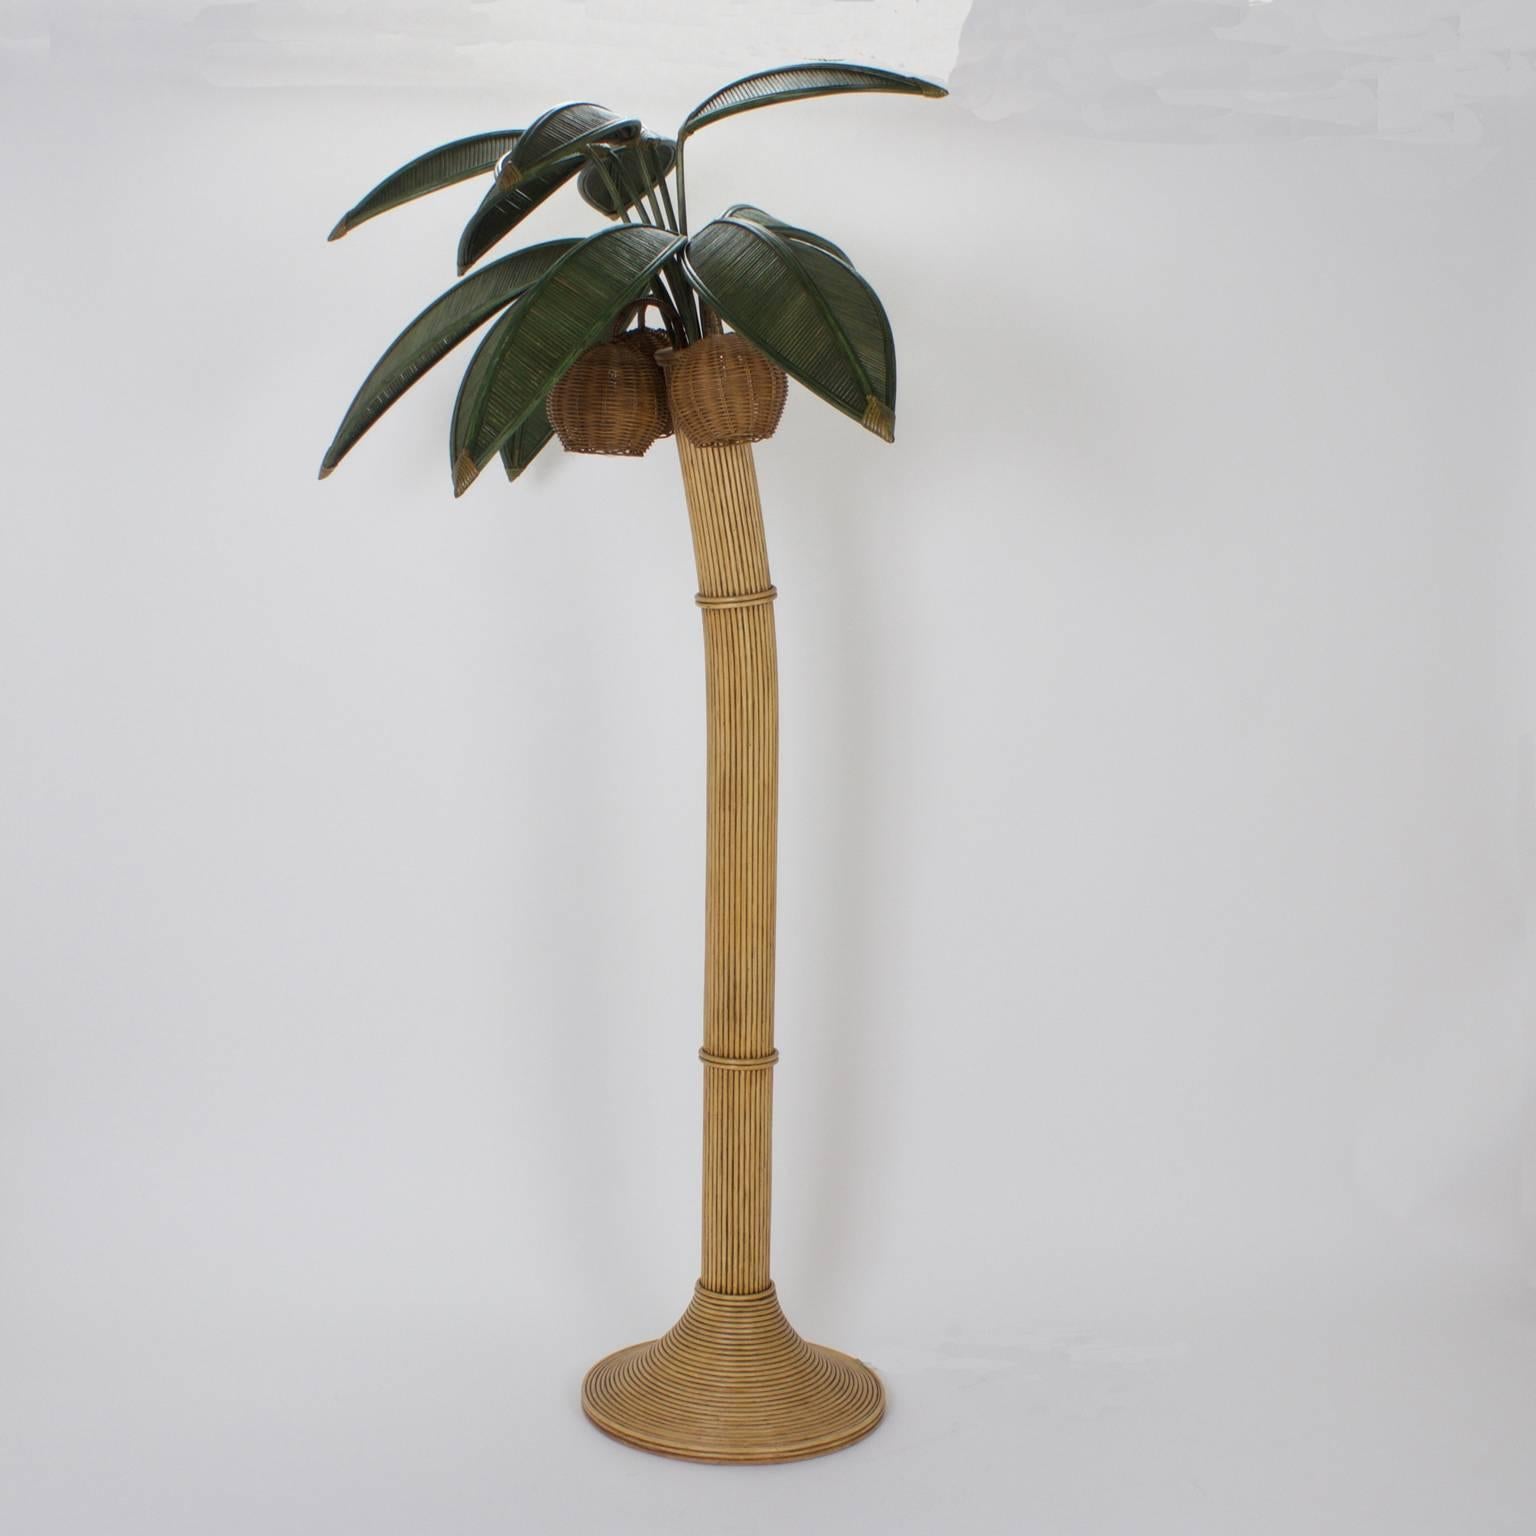 Whimsical, stylized palm tree floor lamp crafted with reed in a well thought out sophisticated design. Having subtle green painted palm leaves and three wicker coconuts that are lights, simple ringed trunk, and Art Deco style base. 

